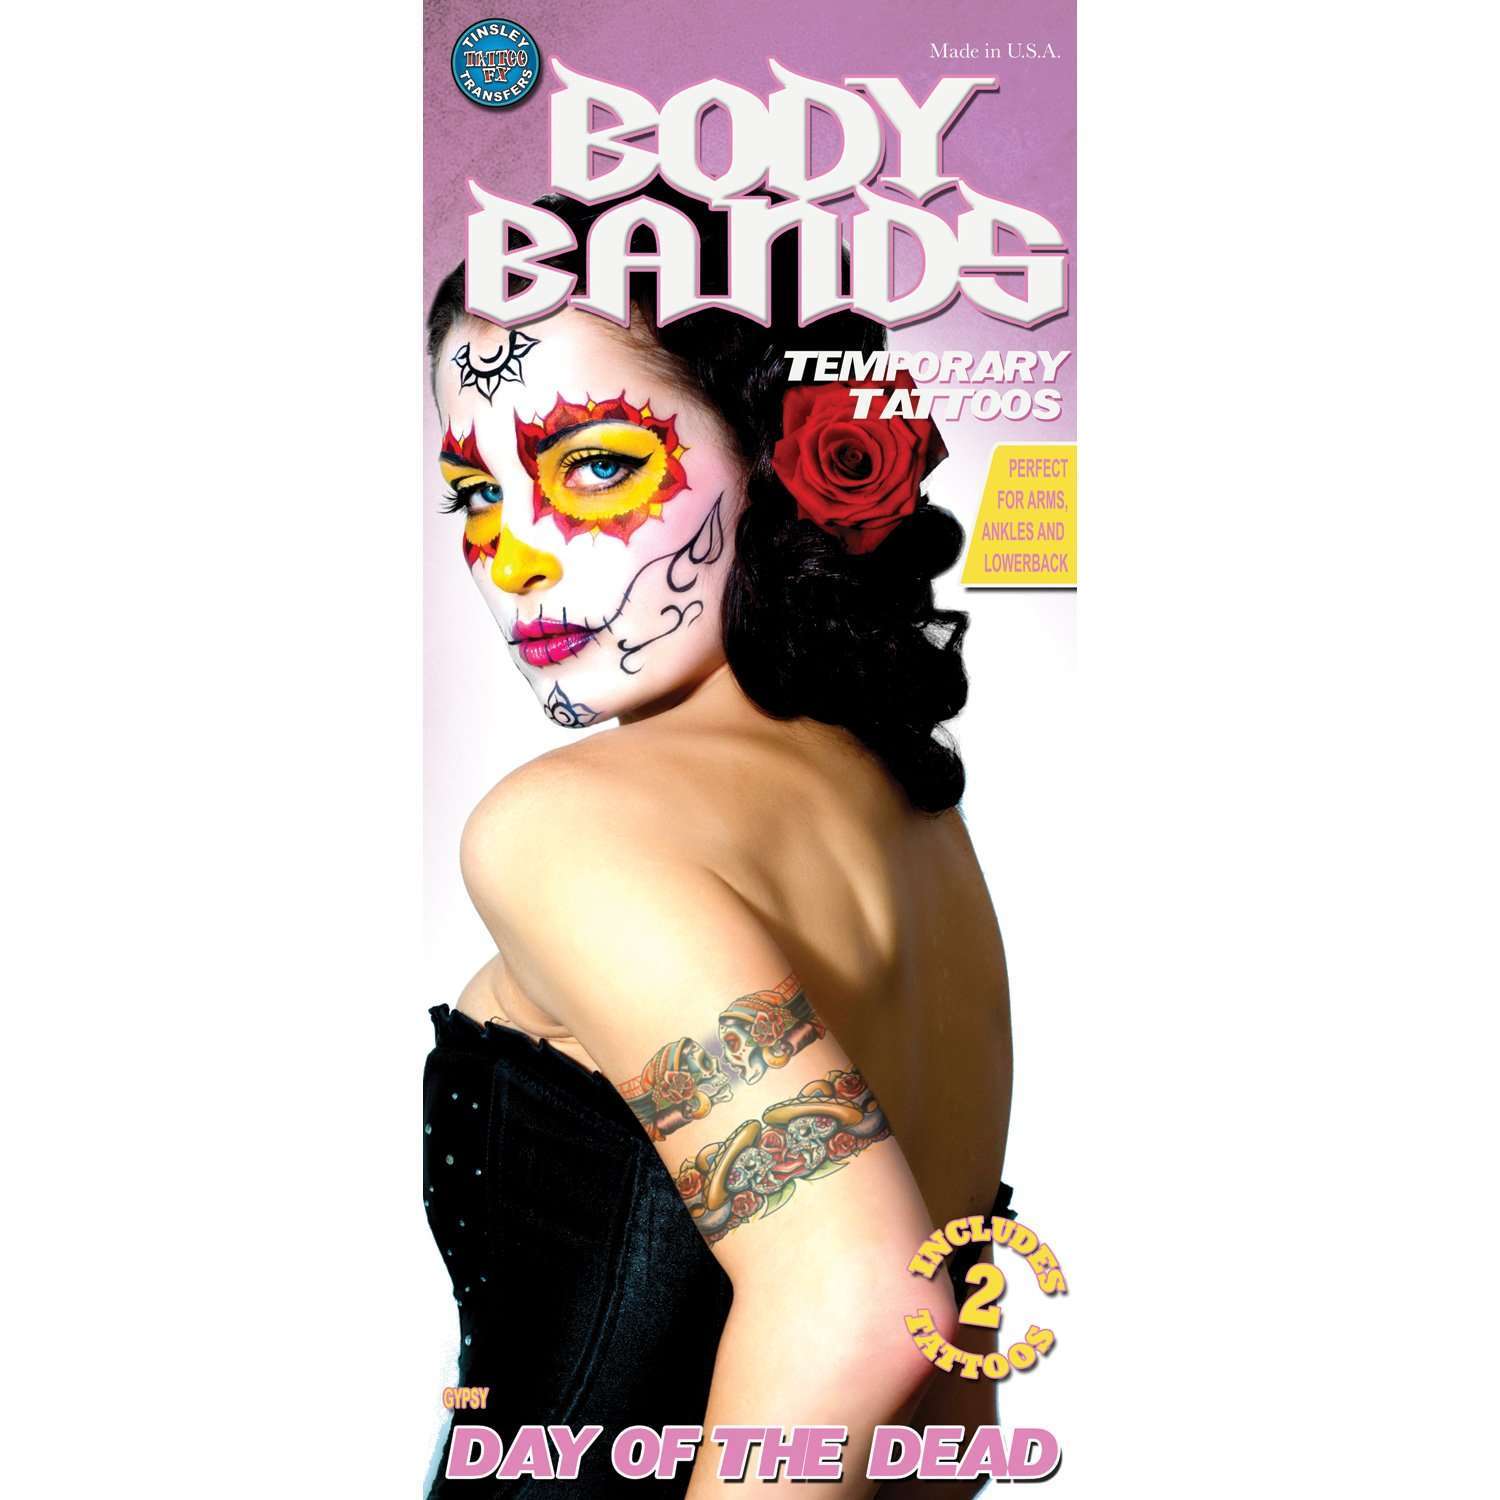 Tinsley Body Bands Tattoo Transfers